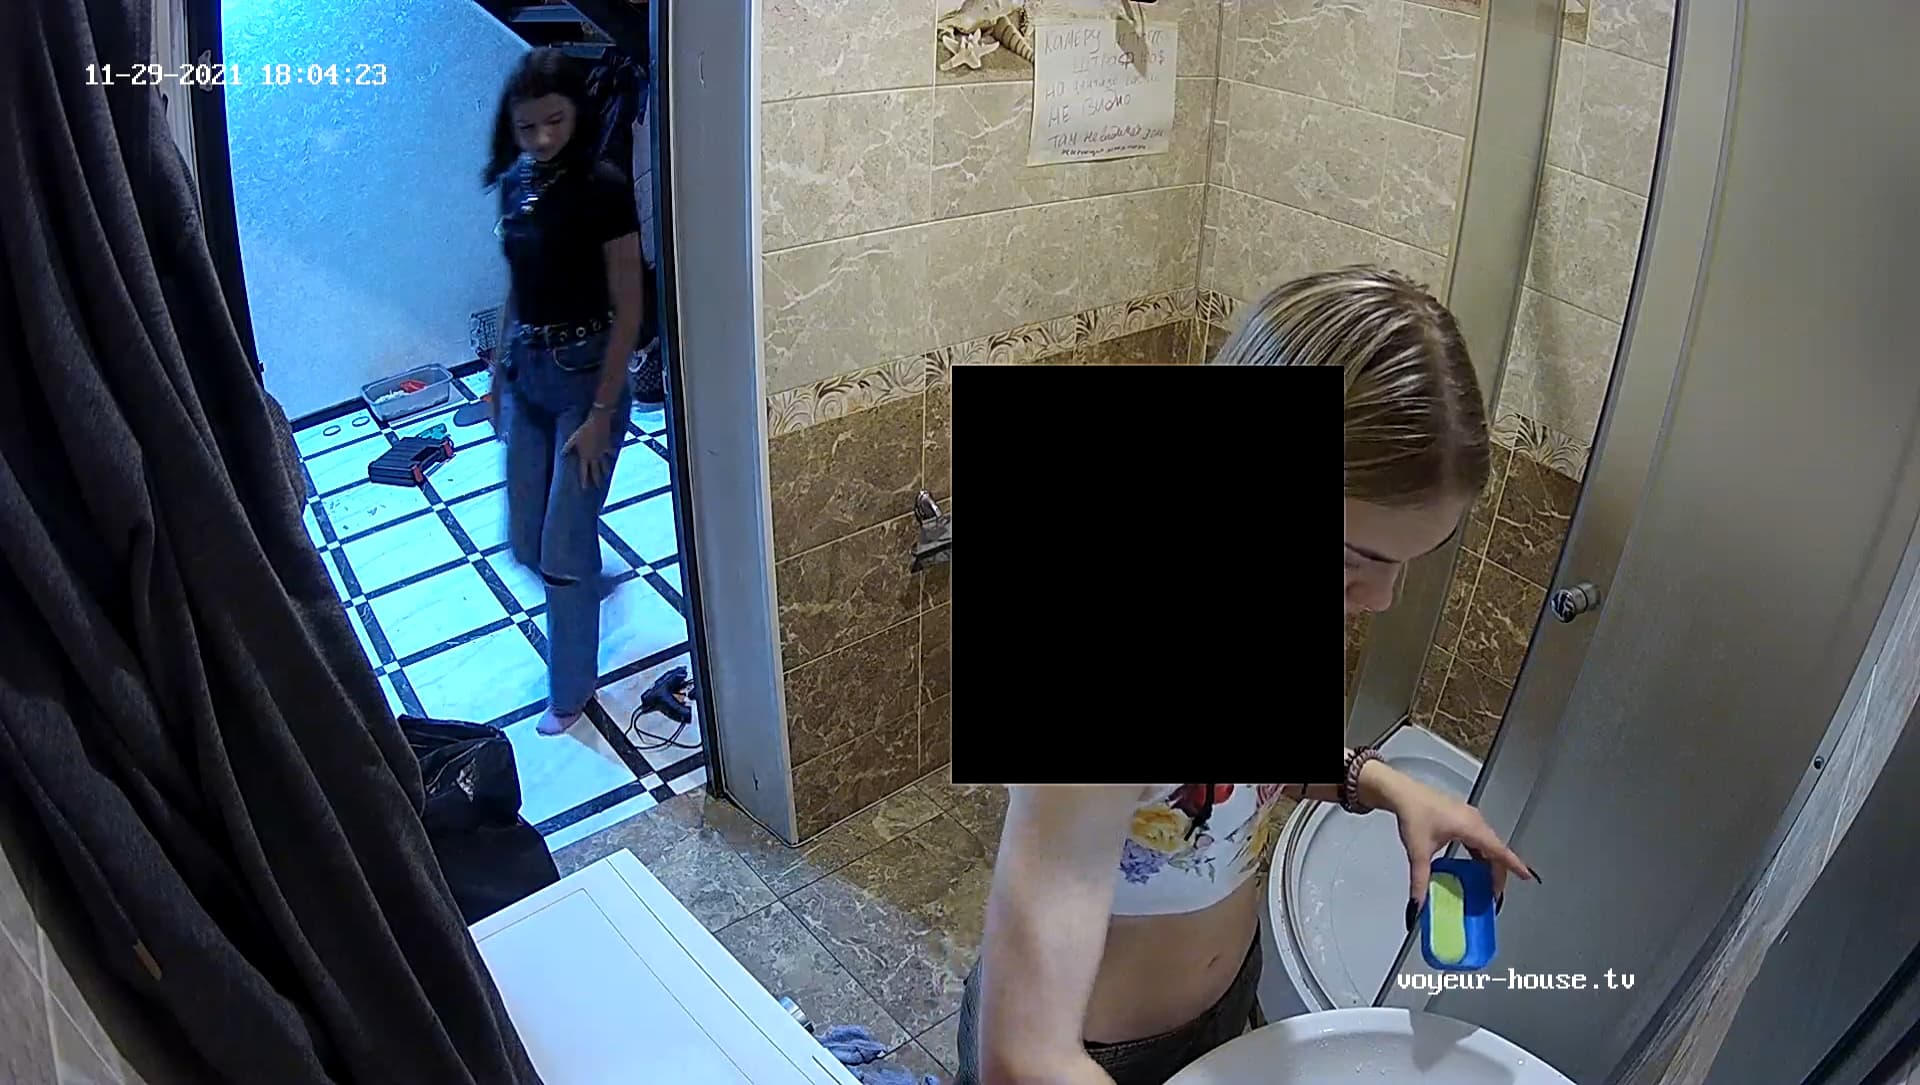 Should toilet cams be banned? - Your Feedback and Ideas photo